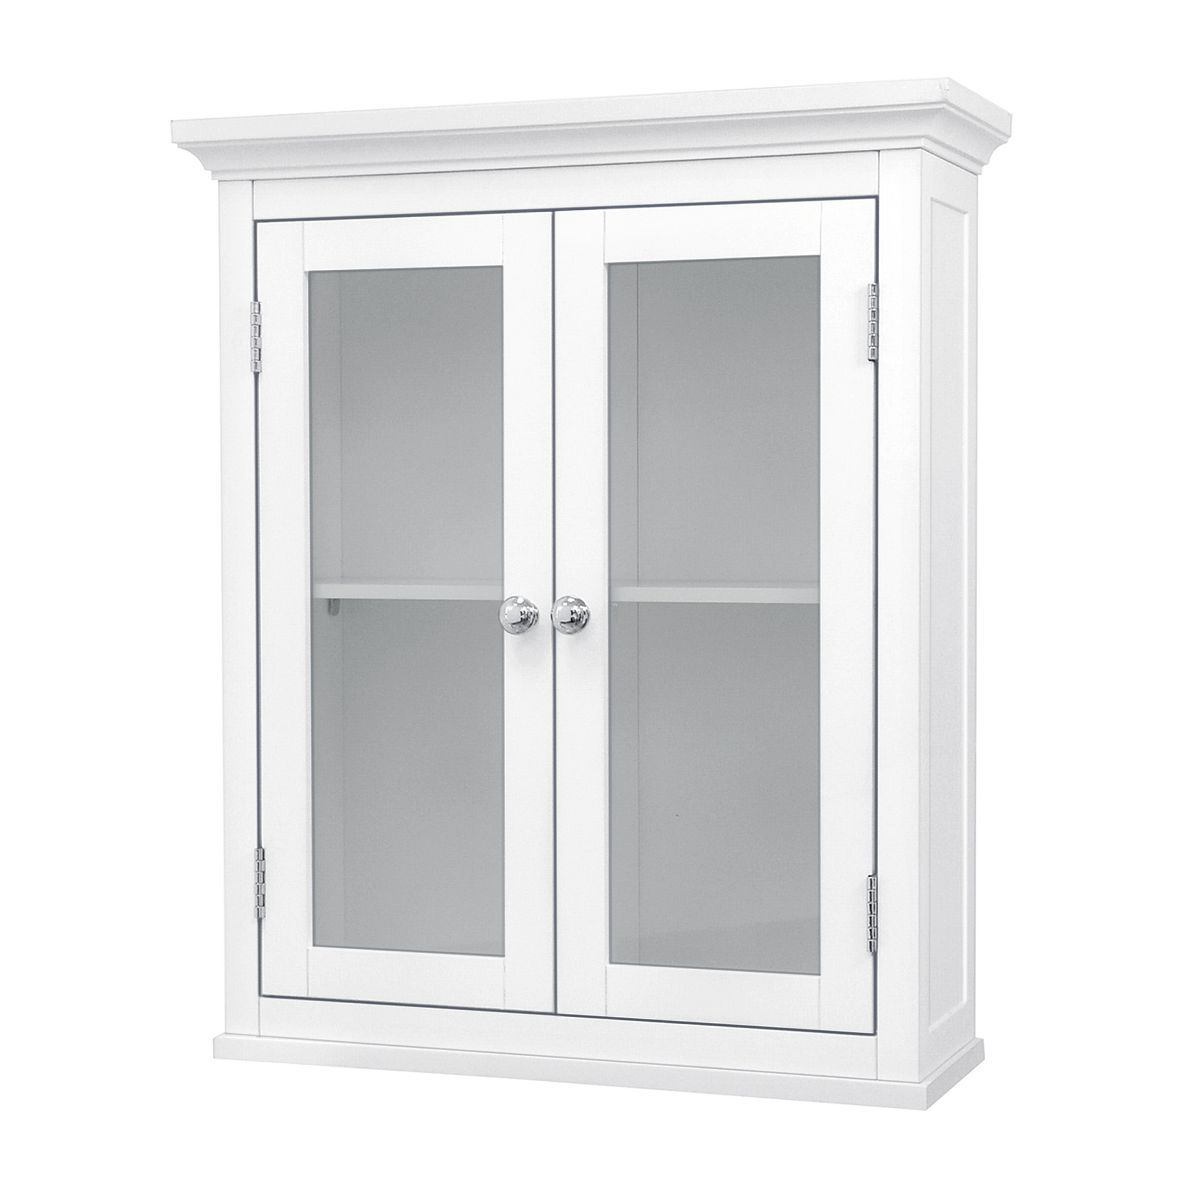 Teamson Home Madison 20" x 24" 2- Door Removable Wall Cabinet, White | Target